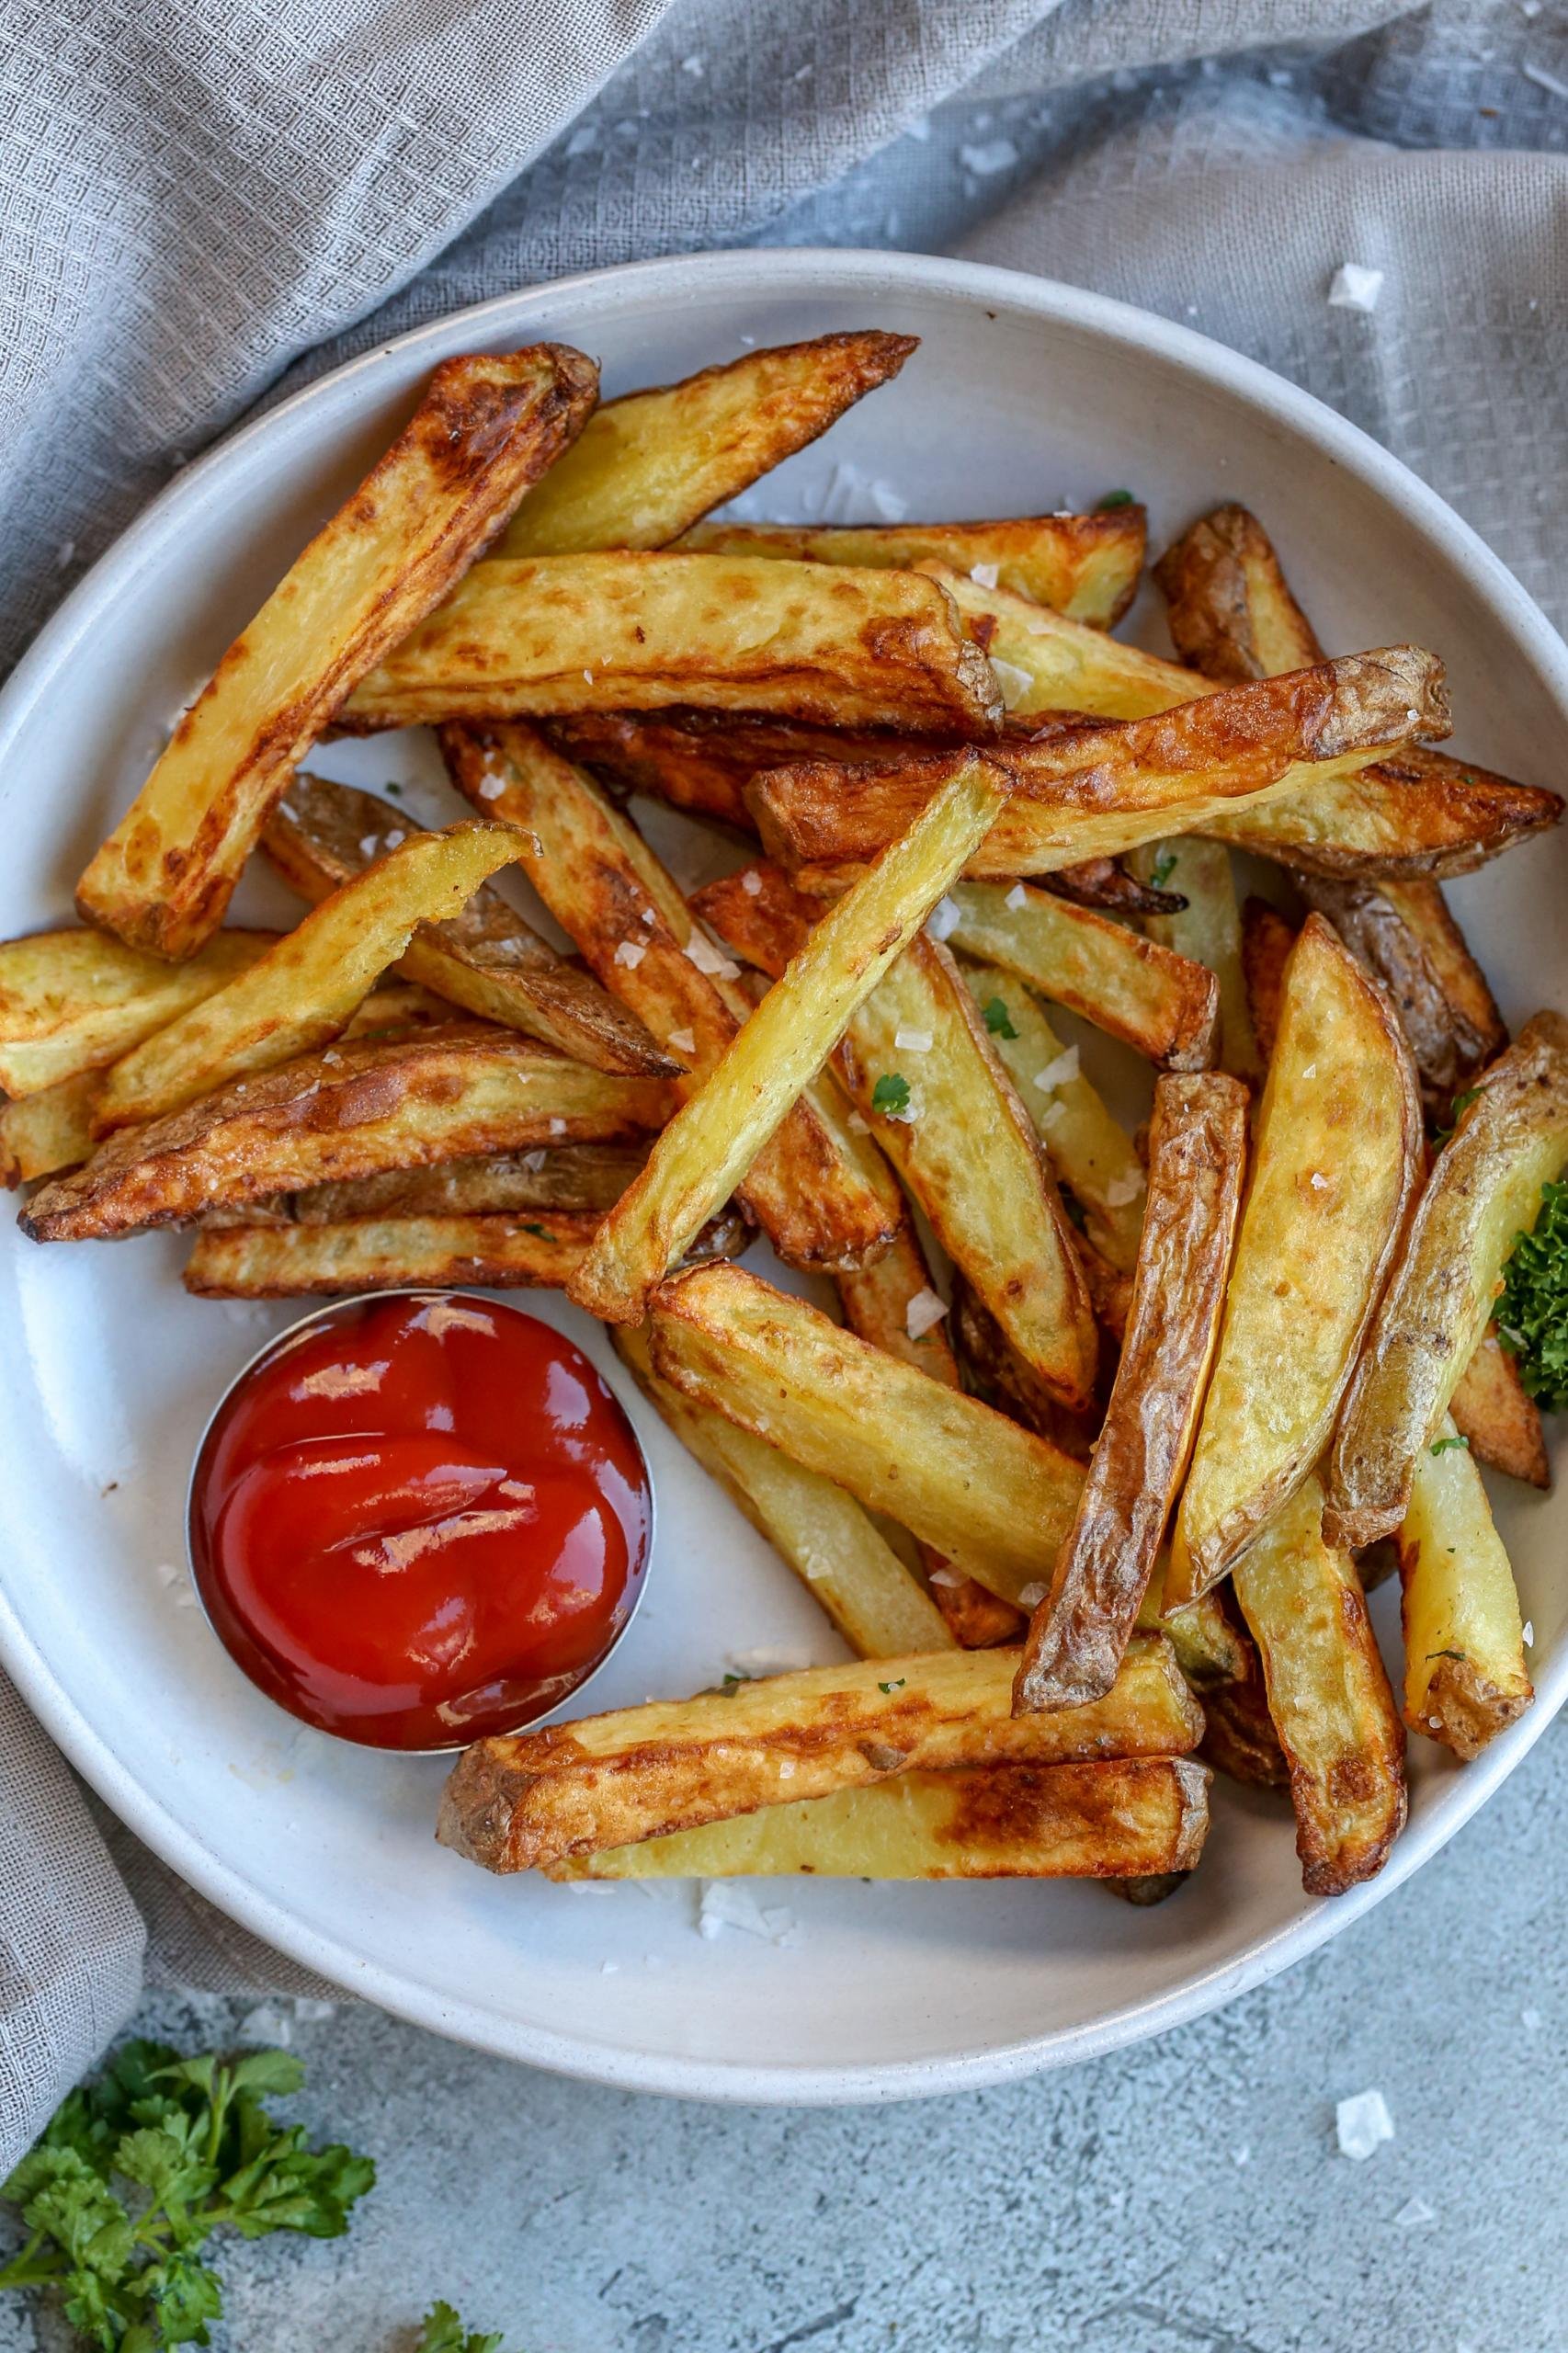 15 Minute Air Fryer French Fries 06 Scaled 